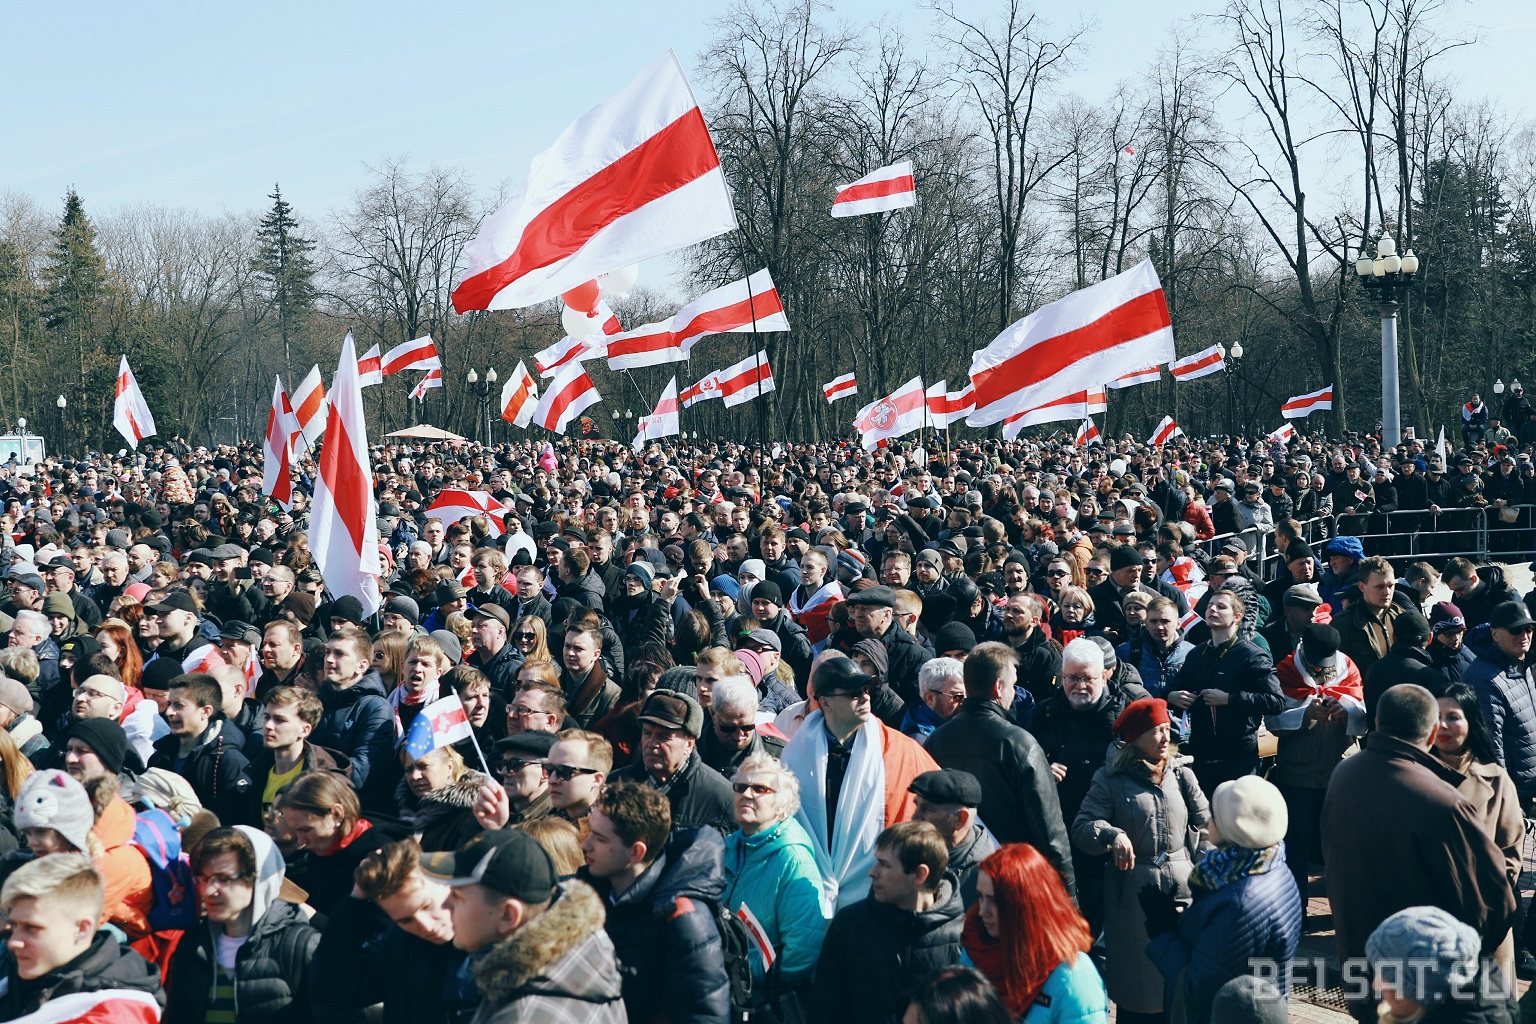 Political parties mobilise regions for the election campaign, civil society starts preparations for the Belarusian People’s Republic’s anniversary celebrations, trade unions represent the interests of “social dependents”